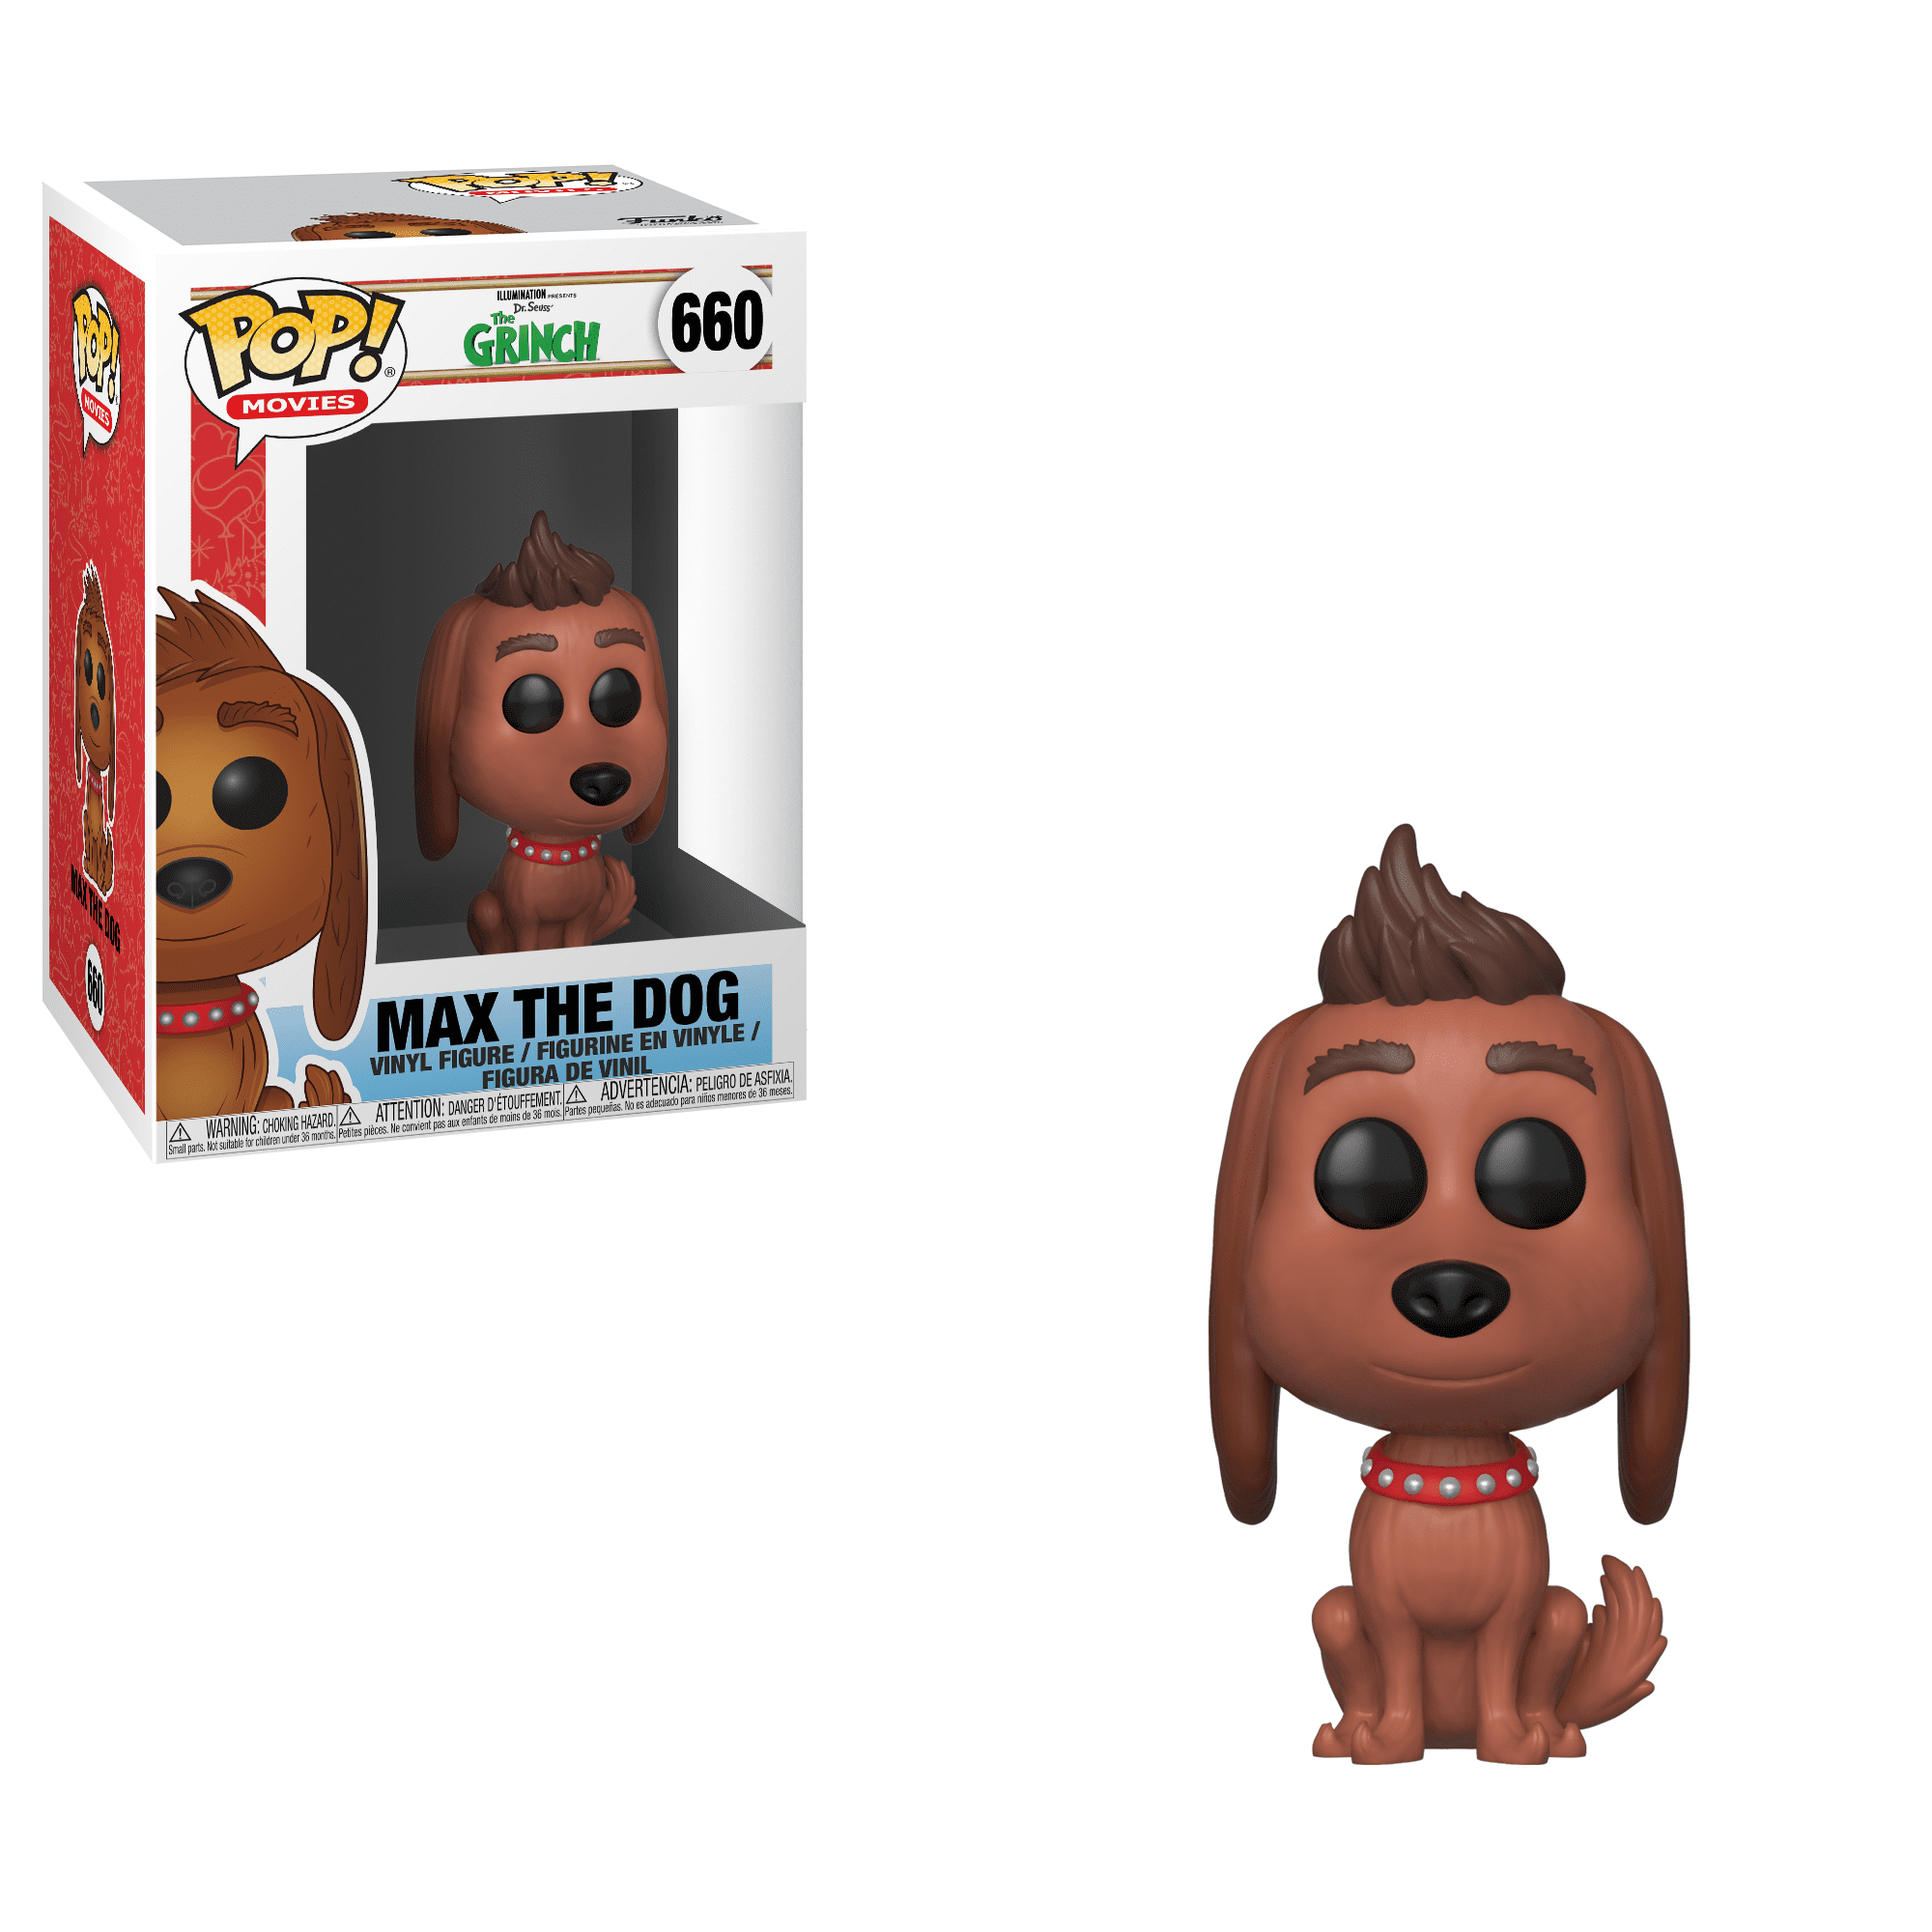 Funko Pop Movies: 2018, Toy NUEVO The Girnch Movie: Max The Dog 